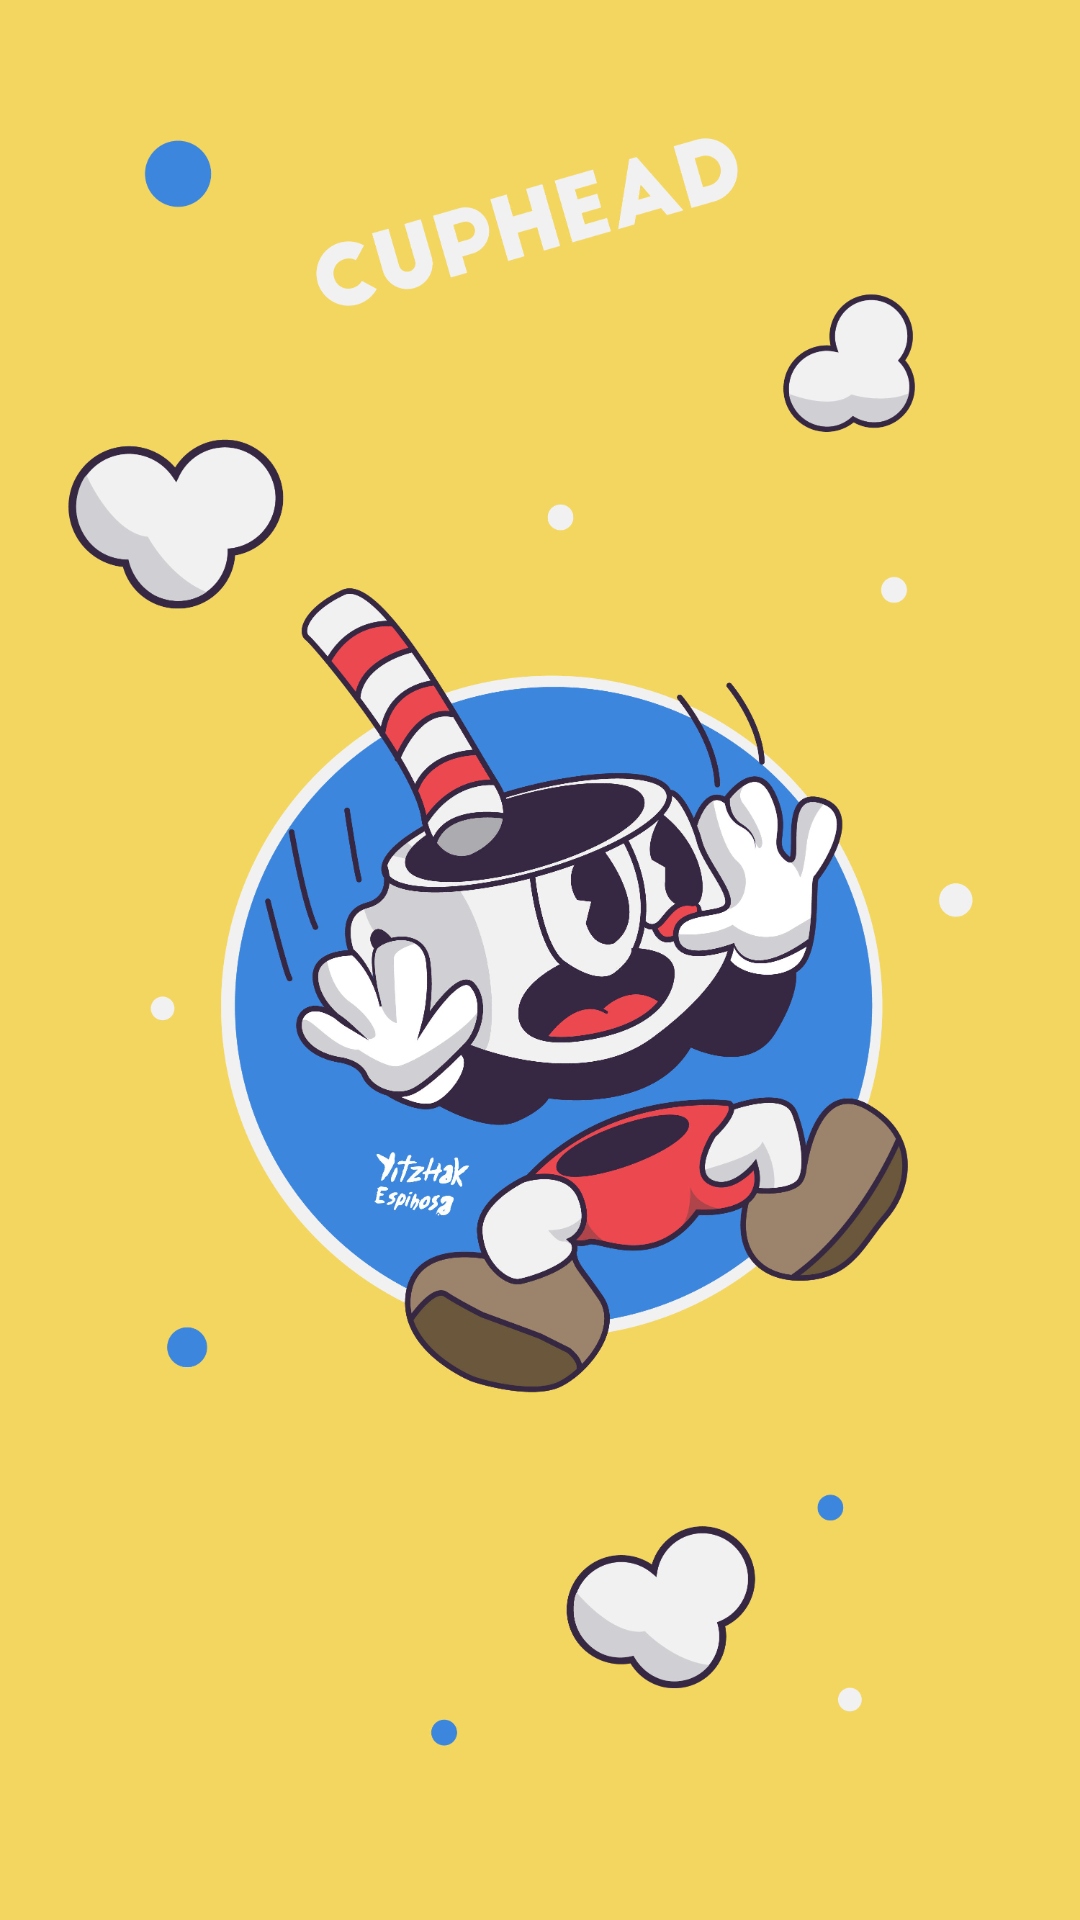 The Cuphead Show Wallpaper